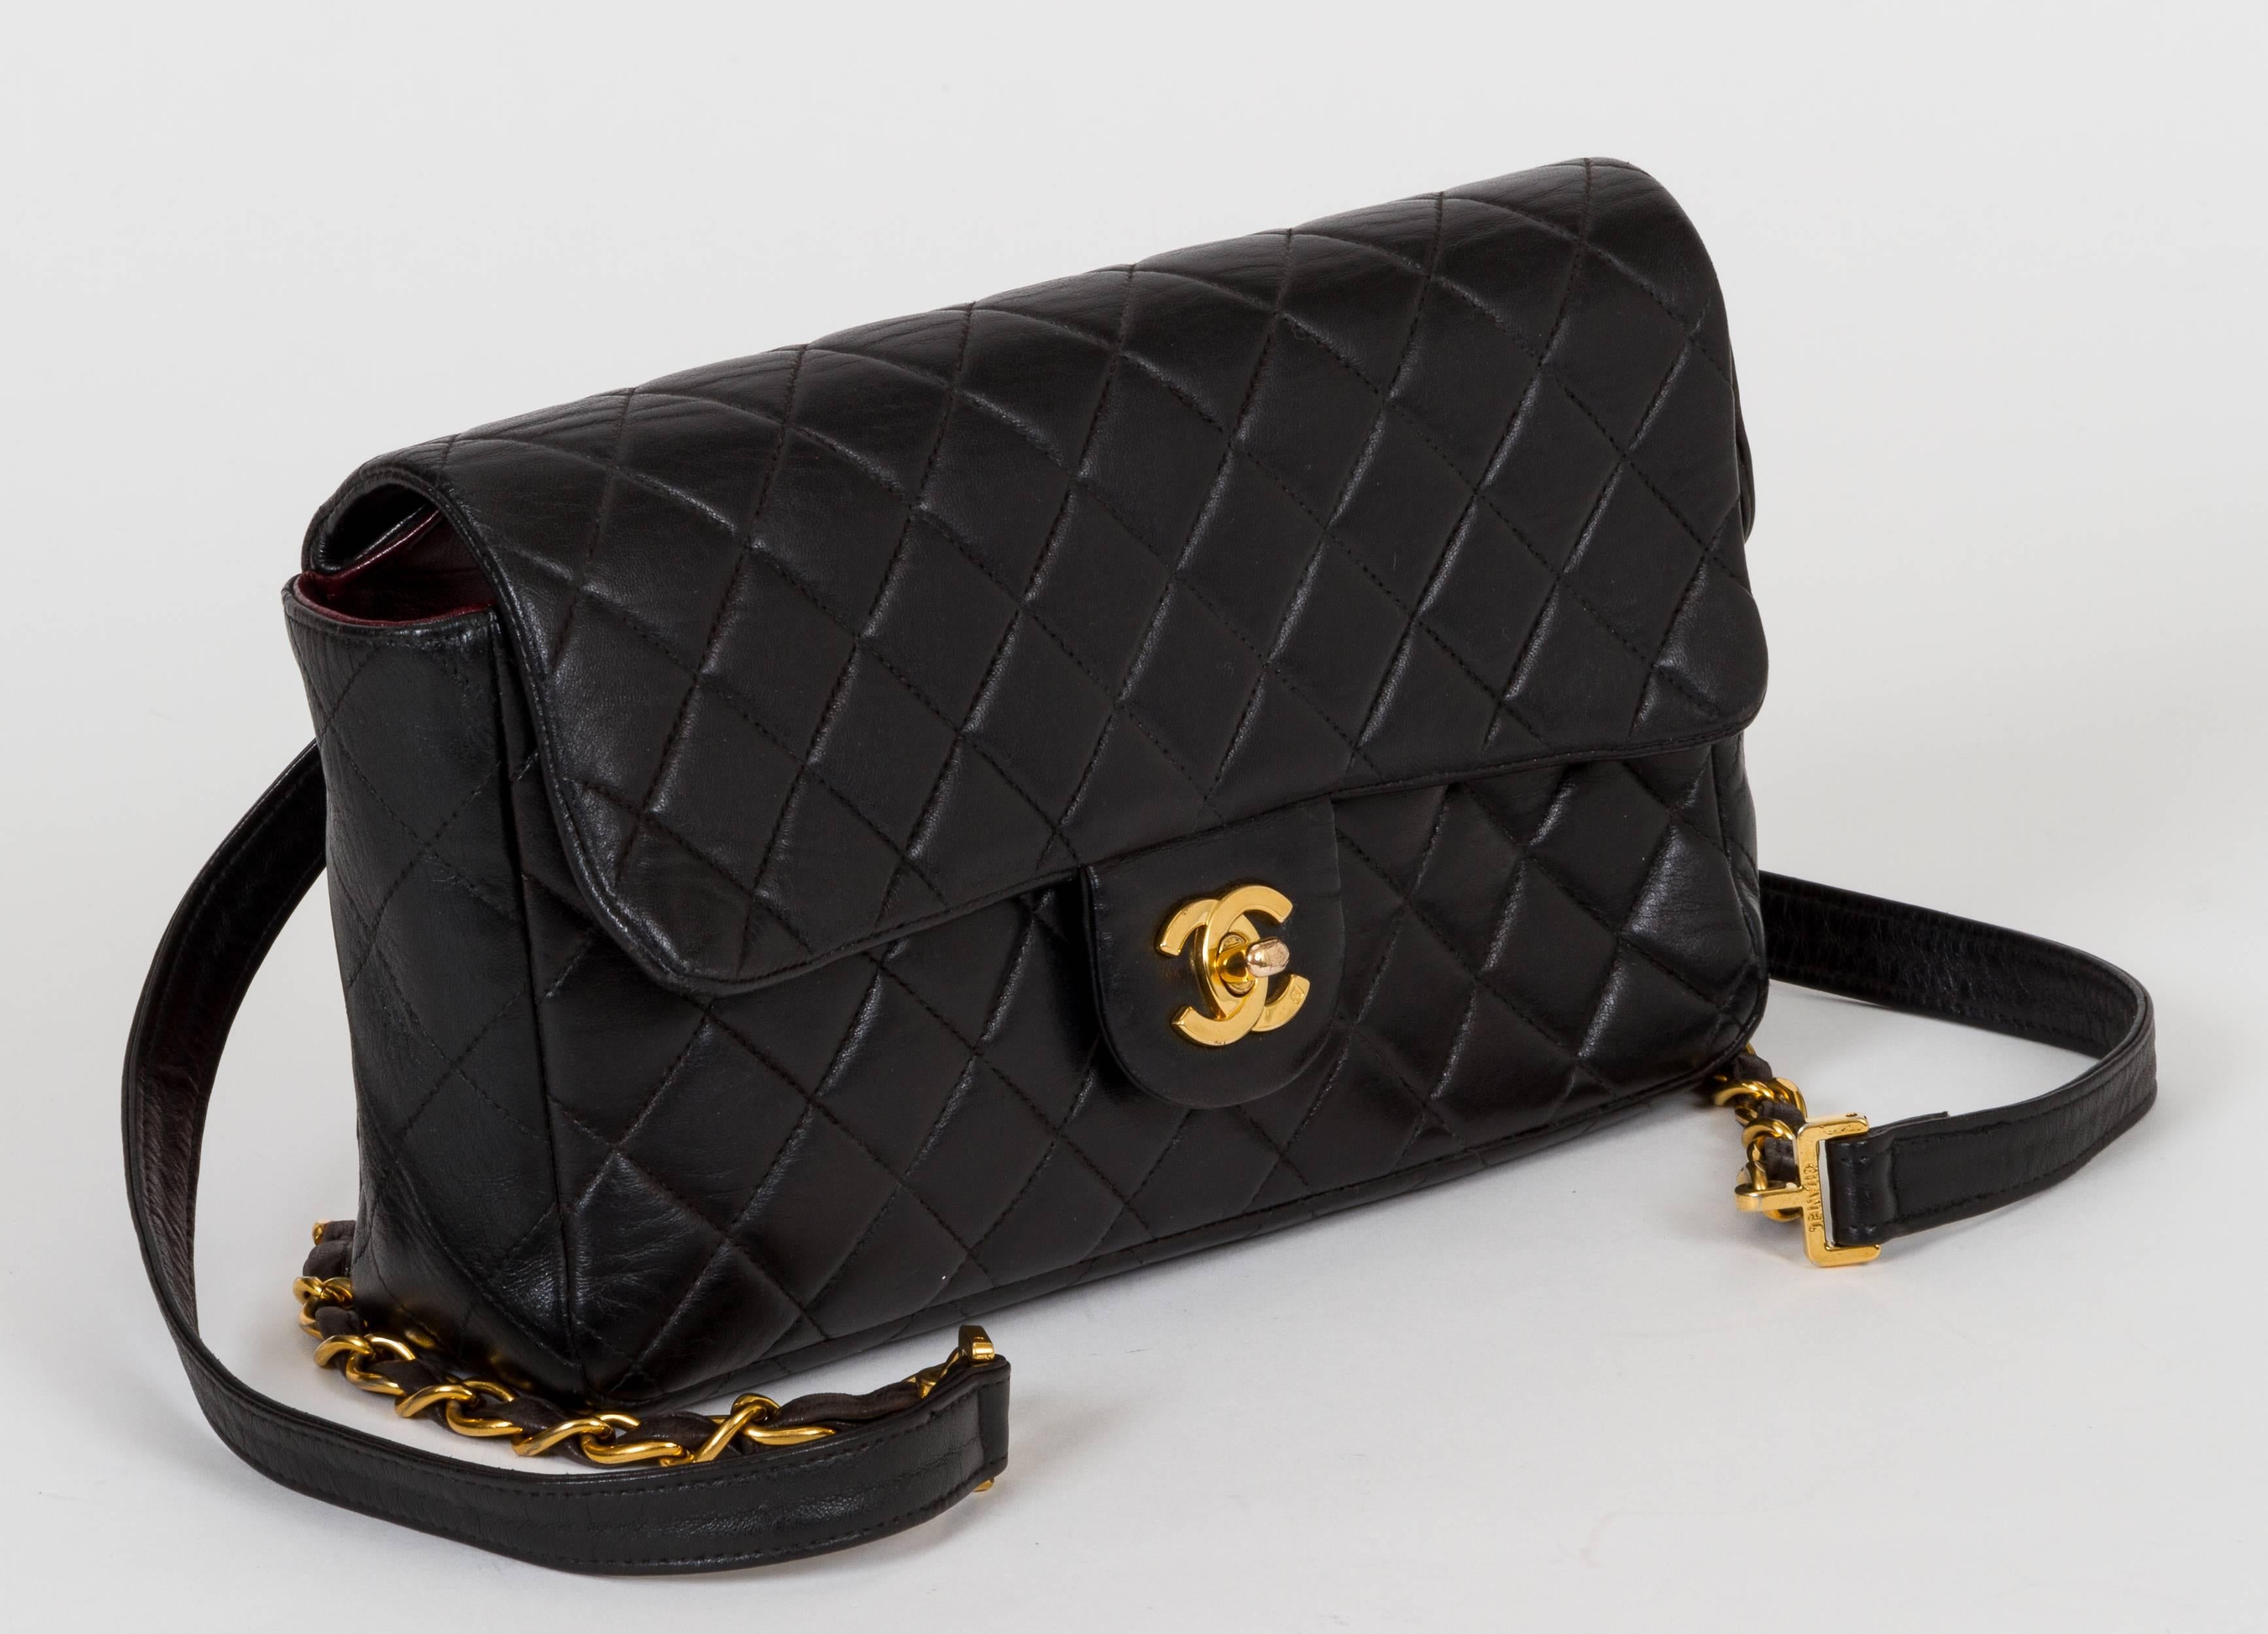 Chanel small black quilted backpack with zipped compartment and flap front. Includes hologram and dust cover. Minor wear on leather.